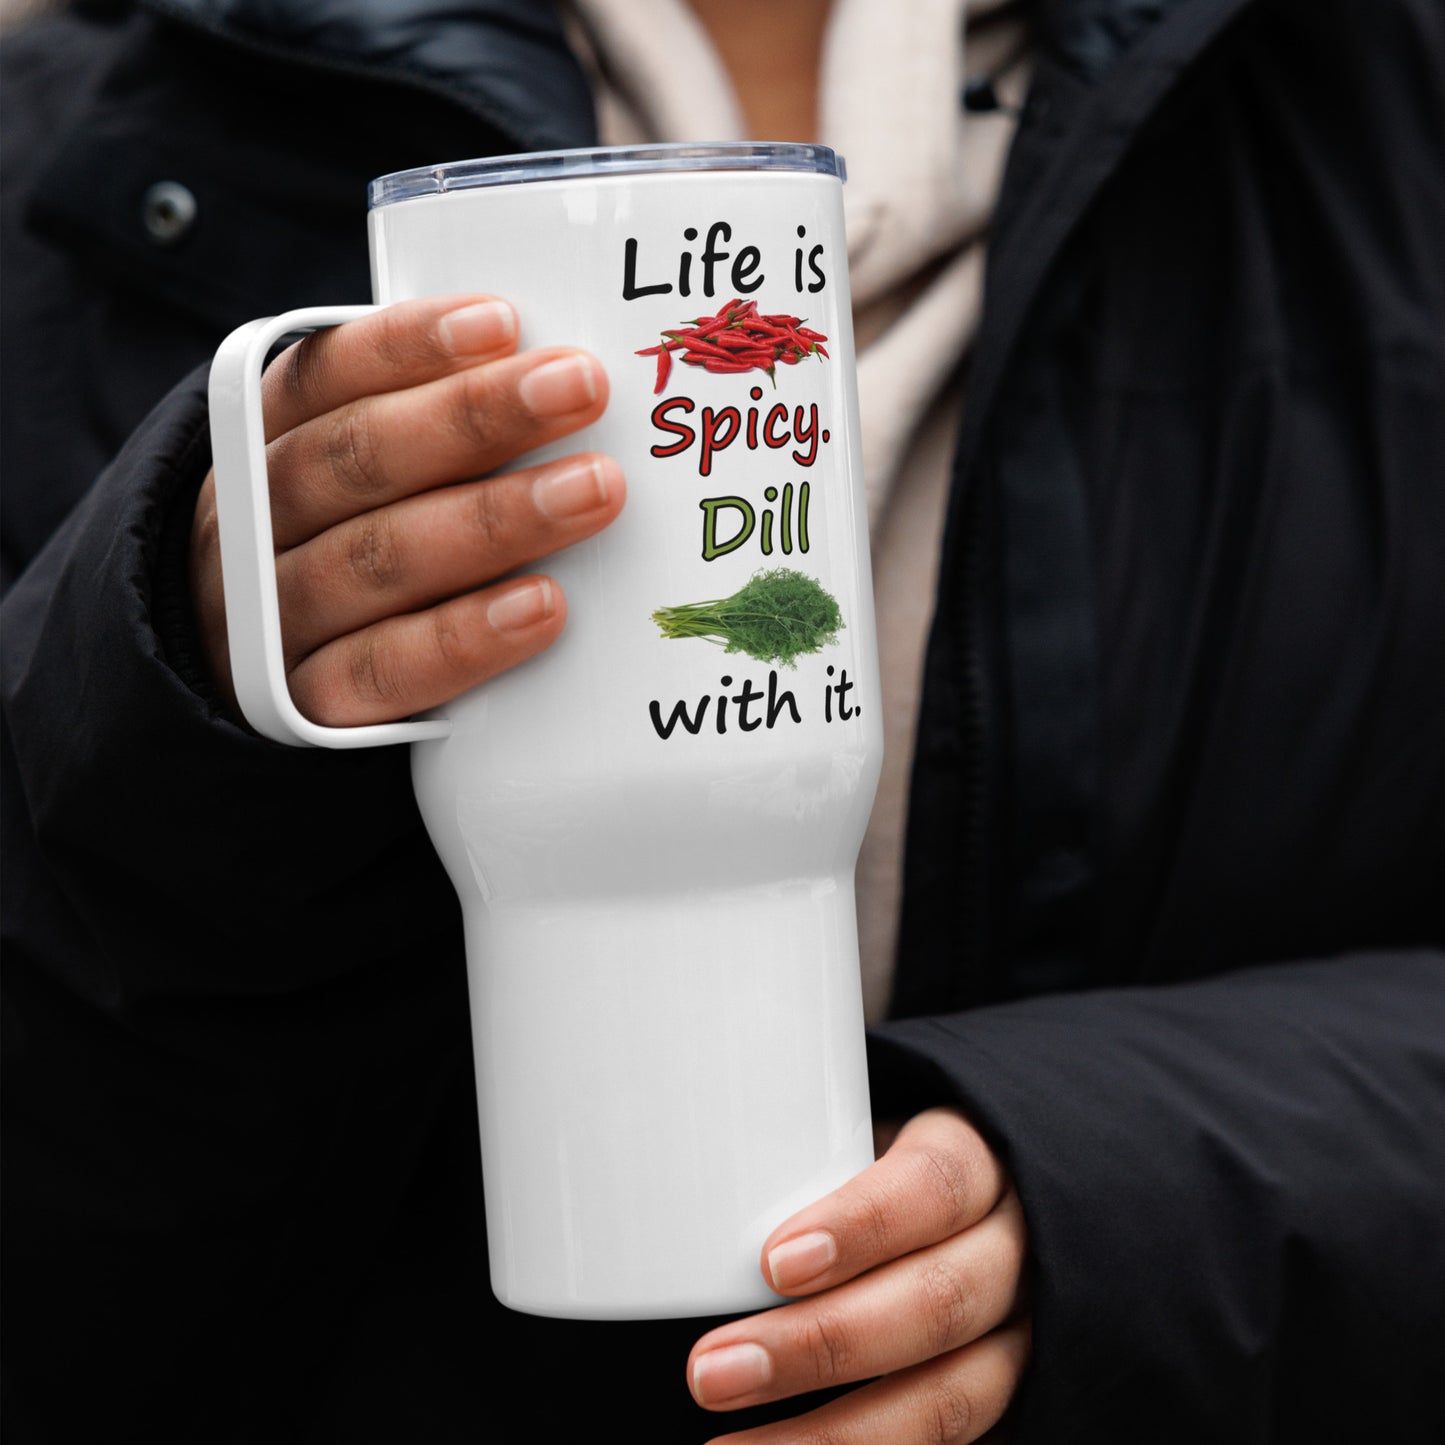 Stainless steel travel mug with handle. Holds 25 ounces of hot or cold liquids. Fits most car cup holders. Features double-sided phrase: Life is spicy. Dill with it, and accompanying chili pepper and dill weed images. Comes with spill proof plastic lid. Shown in model's hands.